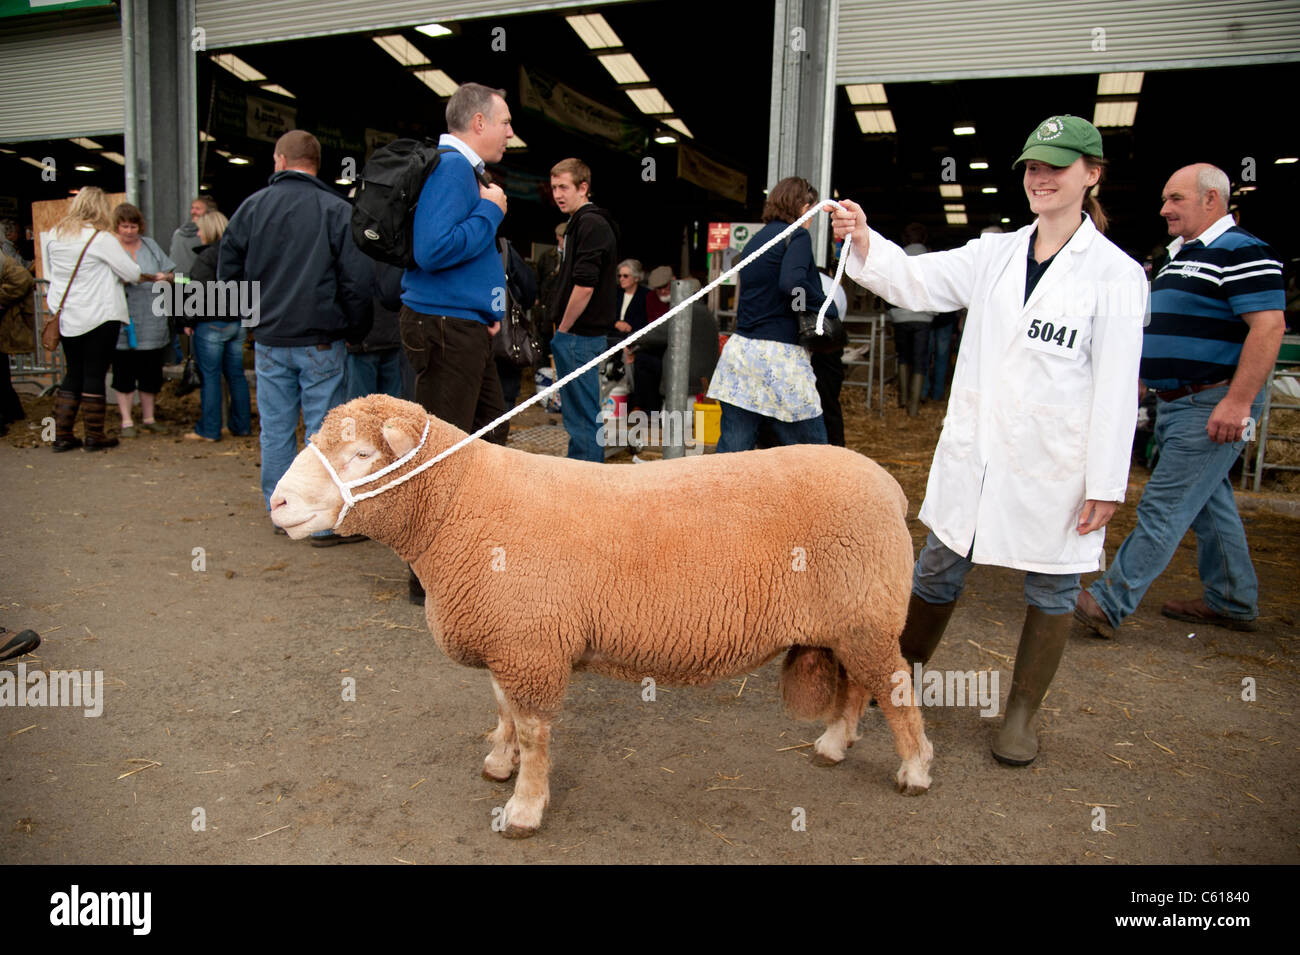 Pecore in mostra in concorso al Royal Welsh Agricultural Show, Builth Wells, Galles, 2011 Foto Stock